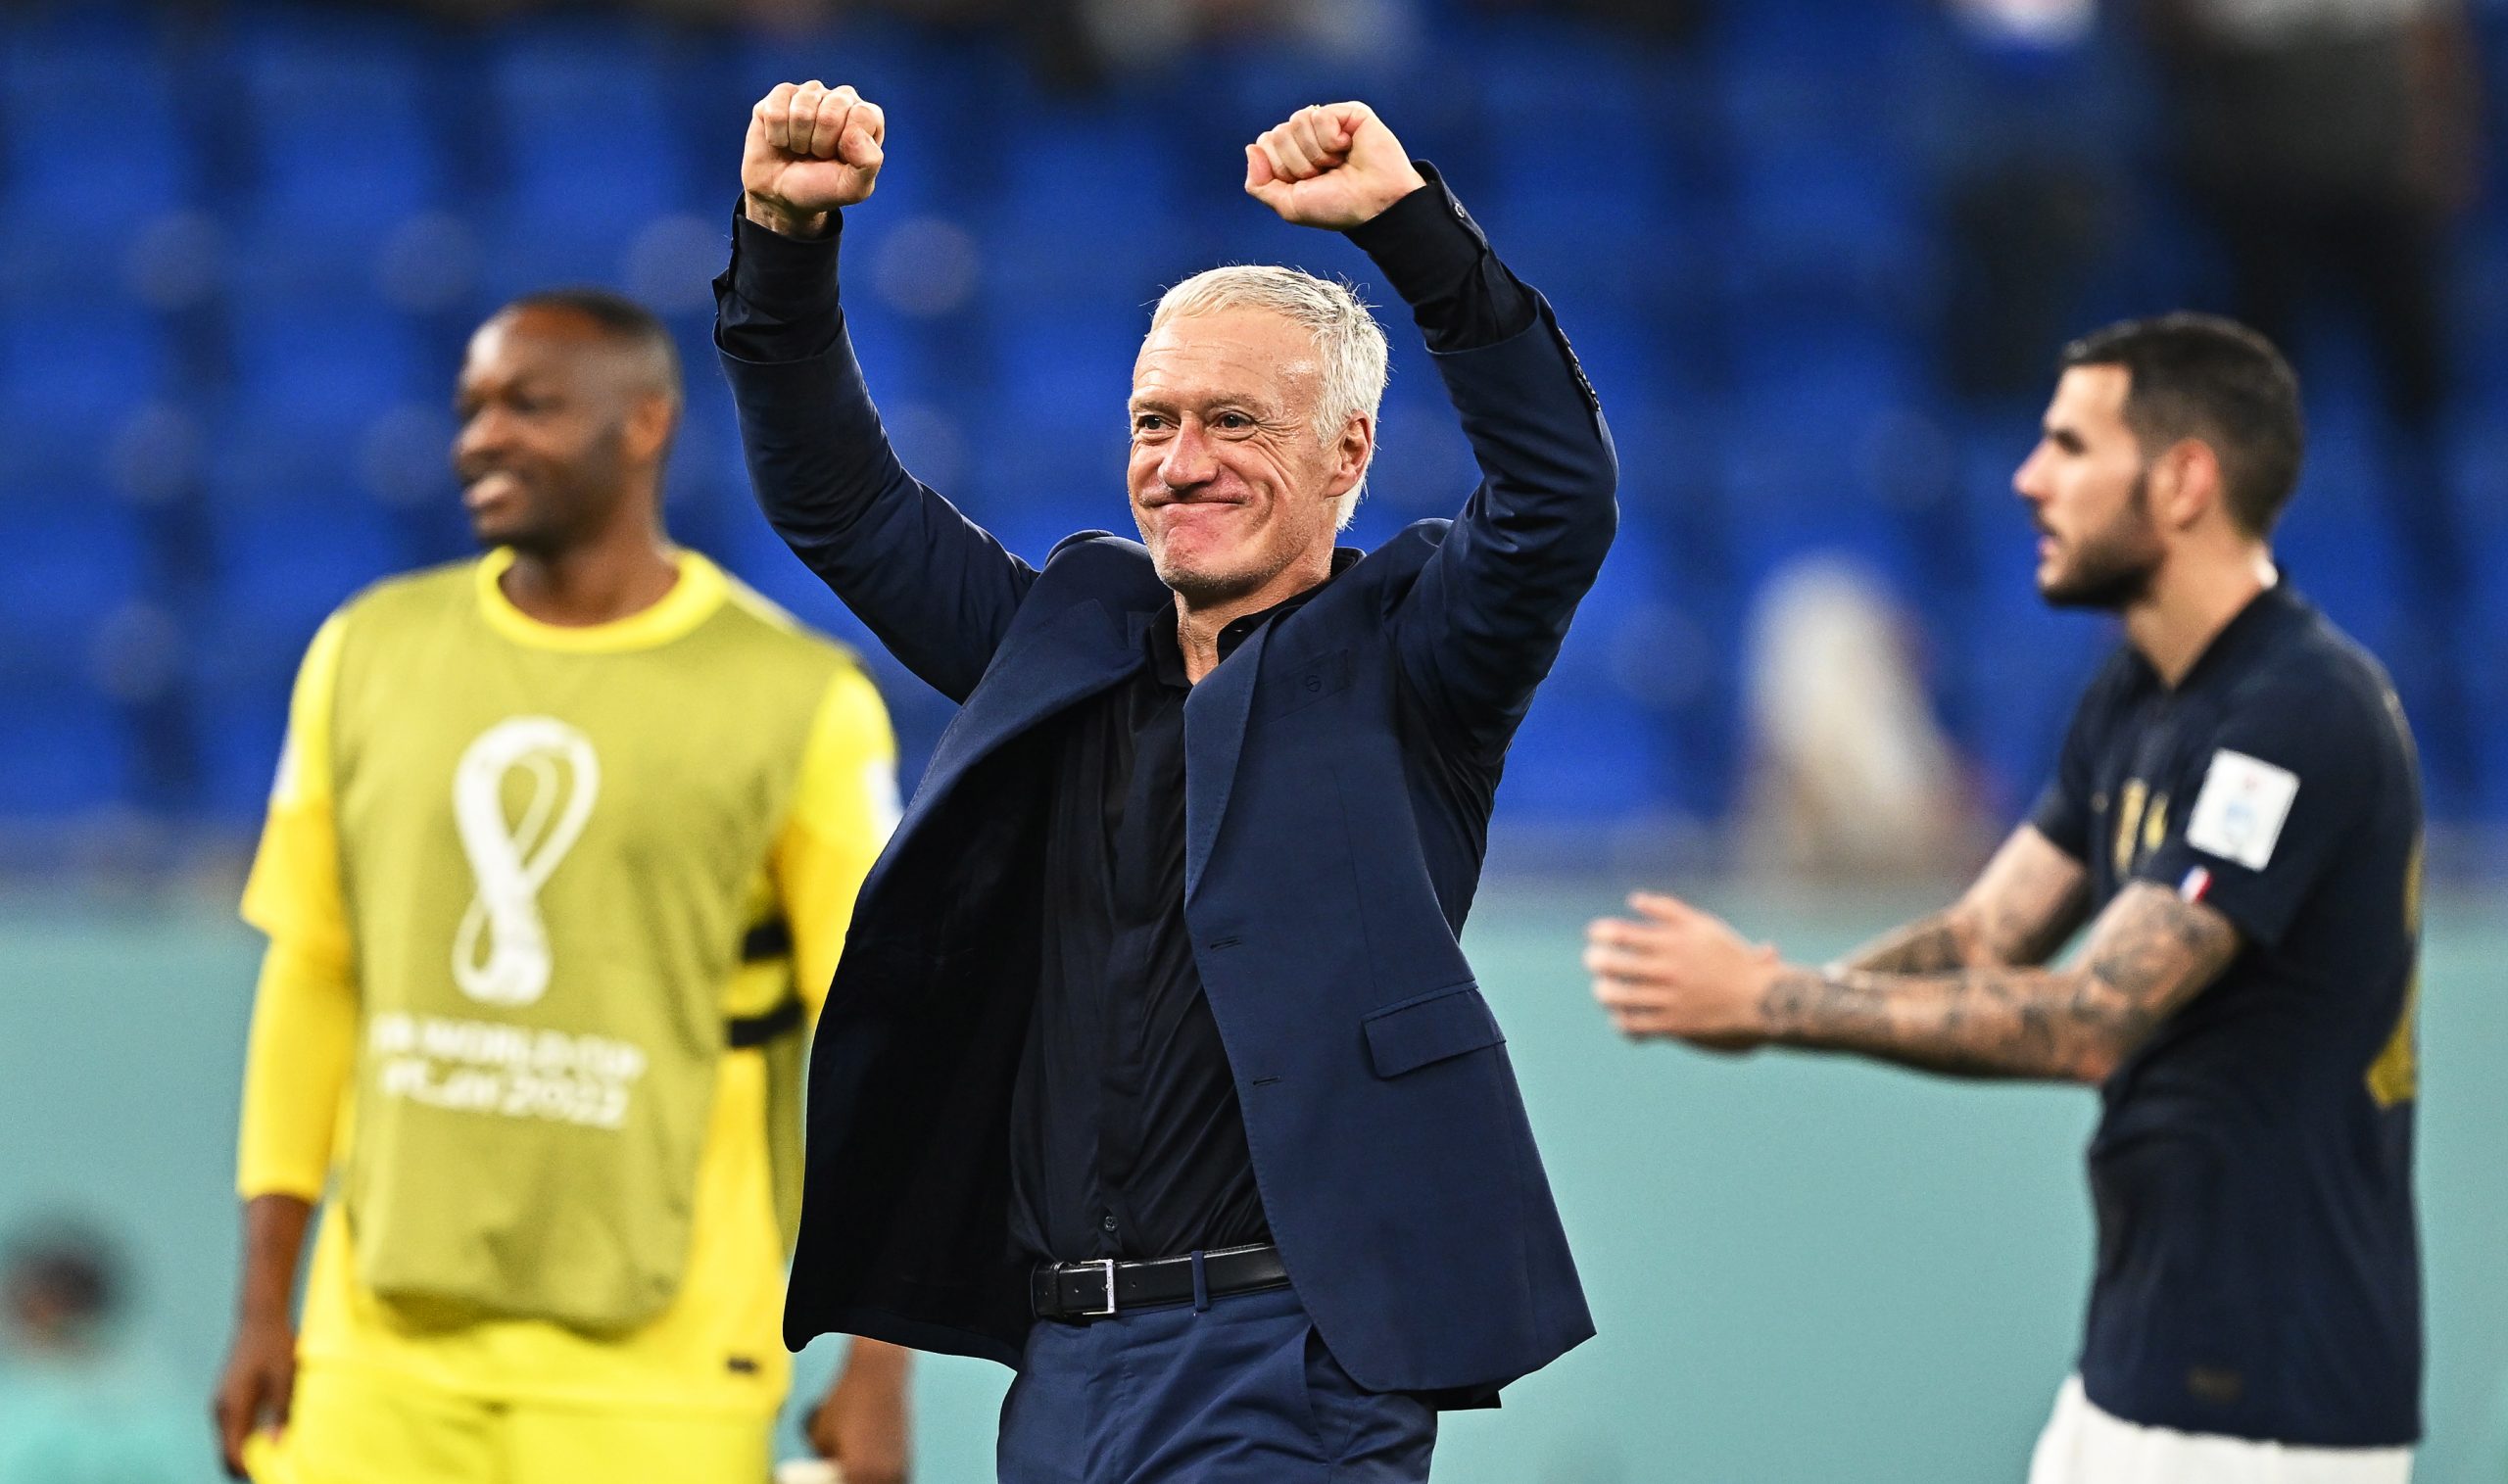 epa10330846 France's head coach Didier Deschamps (C) celebrates after winning the FIFA World Cup 2022 group D soccer match between France and Denmark at Stadium 947 in Doha, Qatar, 26 November 2022.  EPA/Noushad Thekkayil